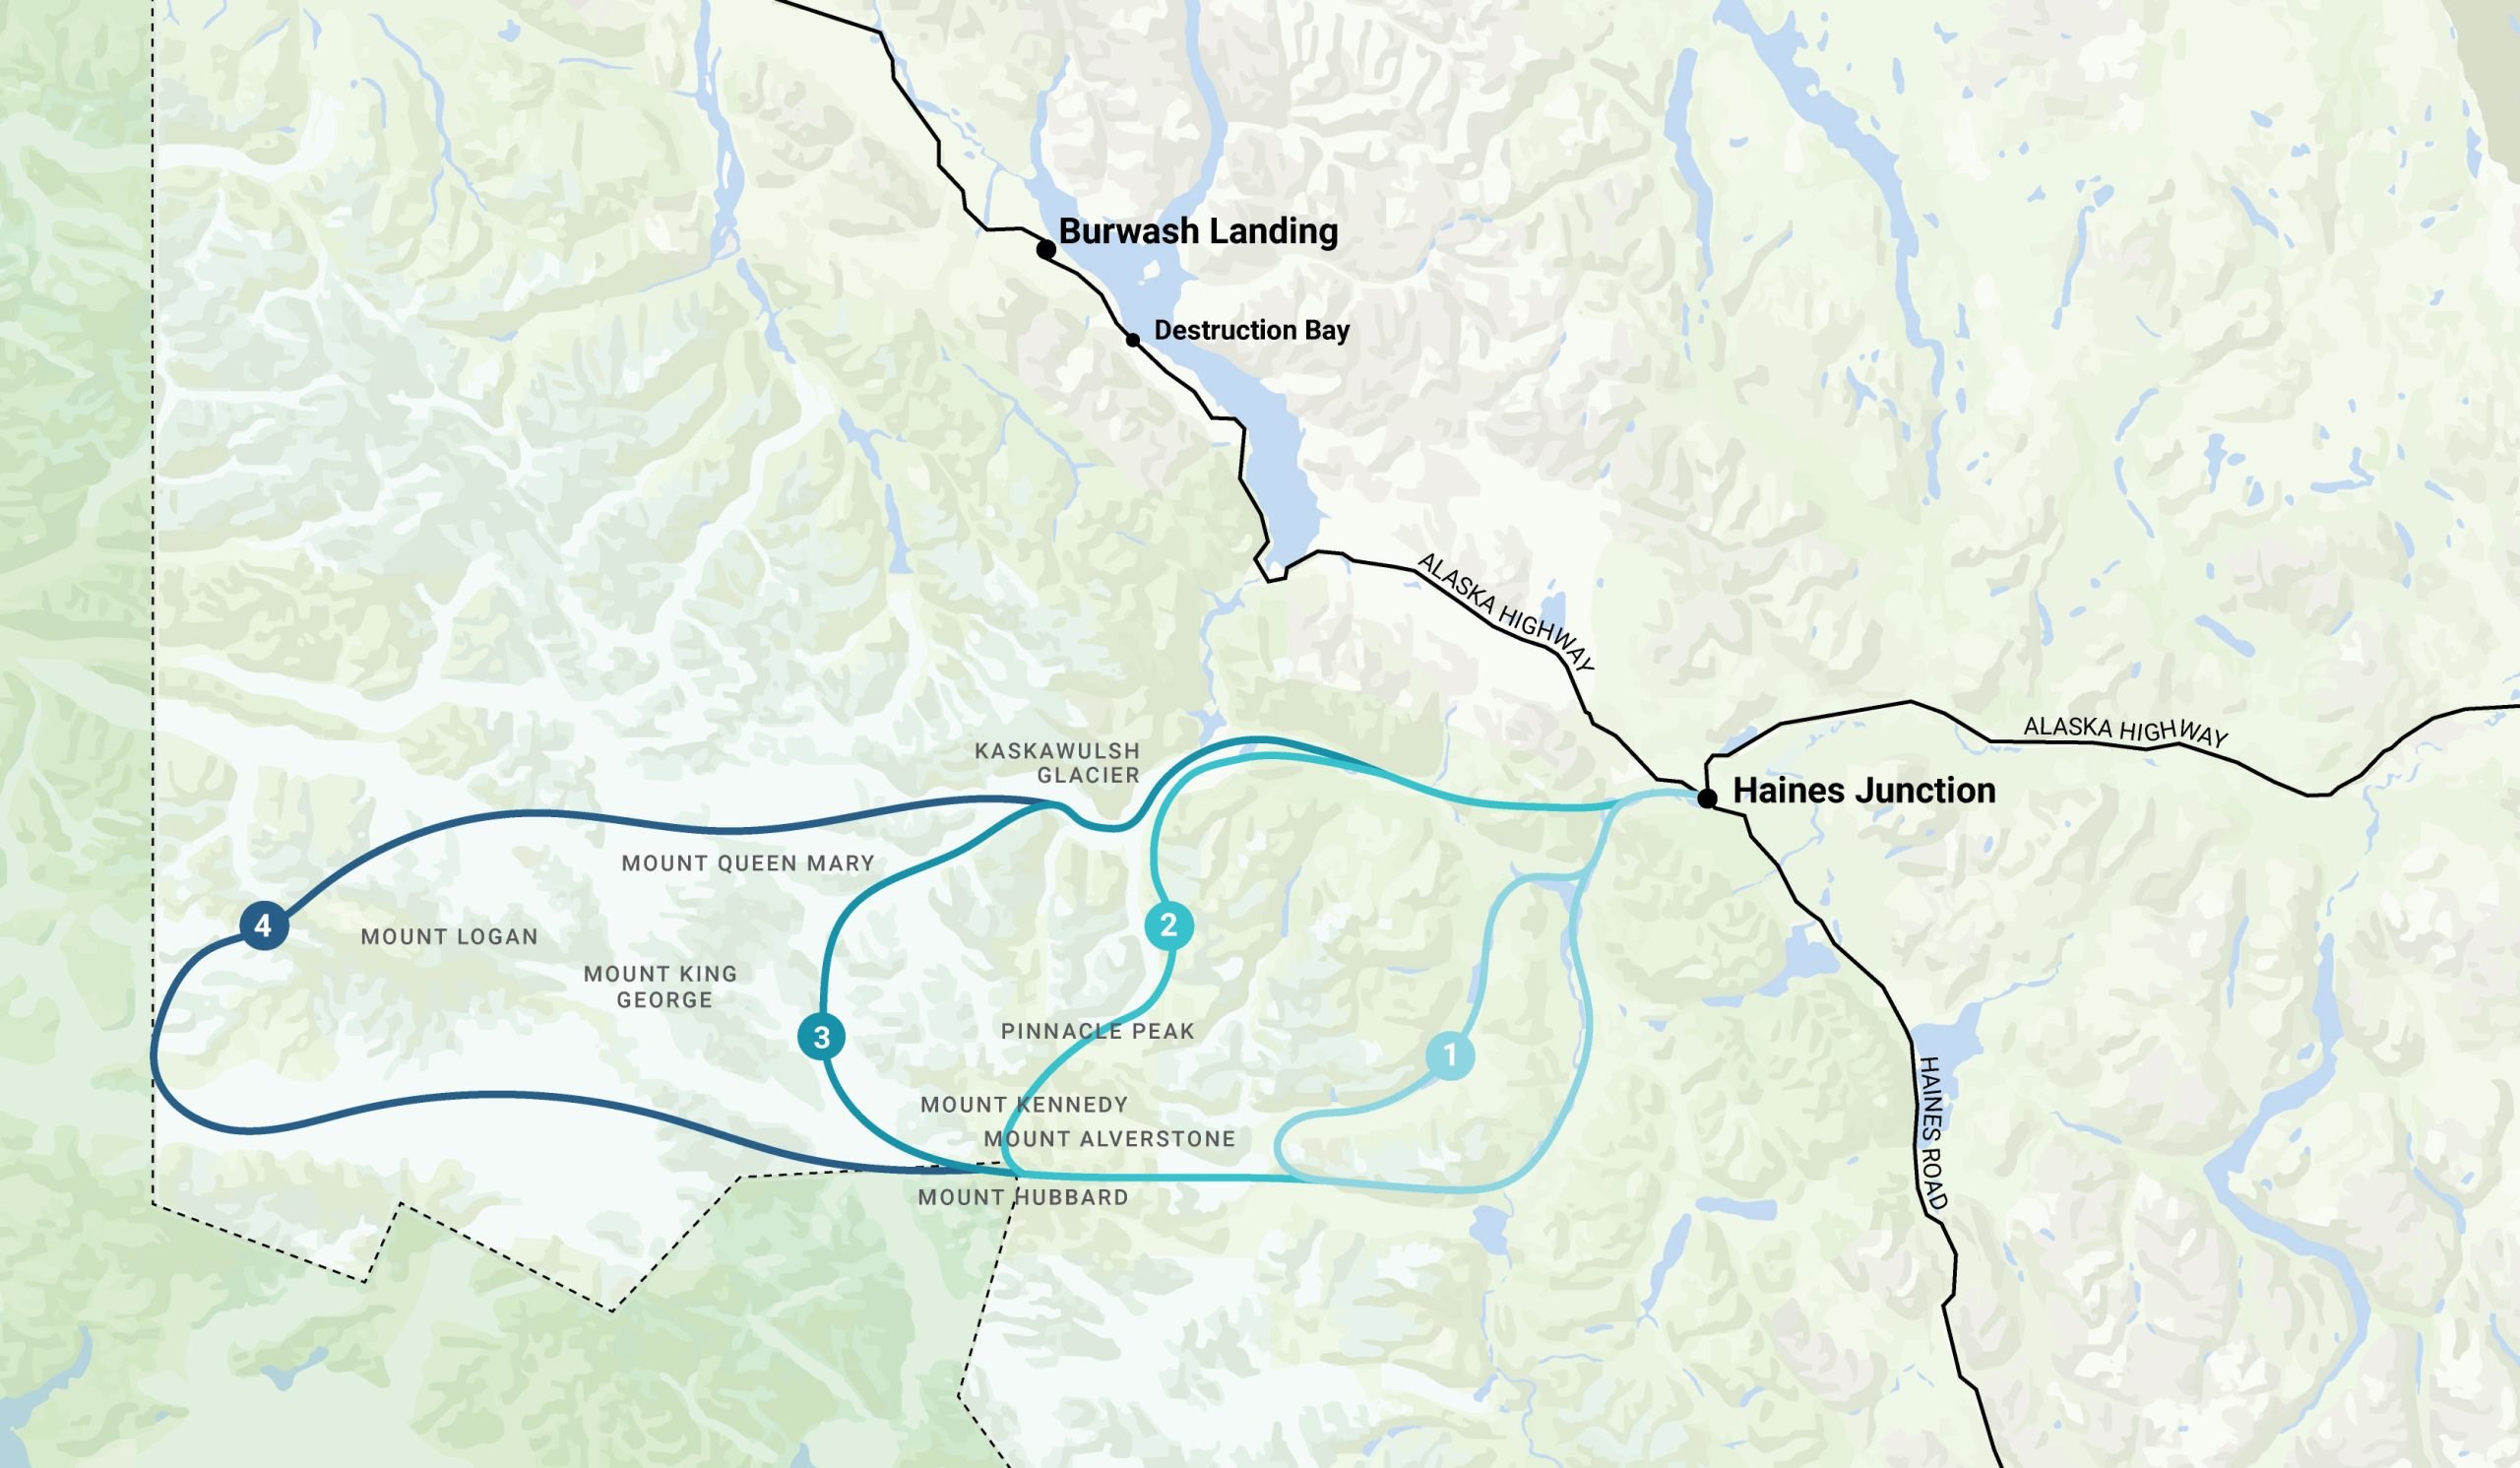 A map drawing of Haines Junction indicating the tour location